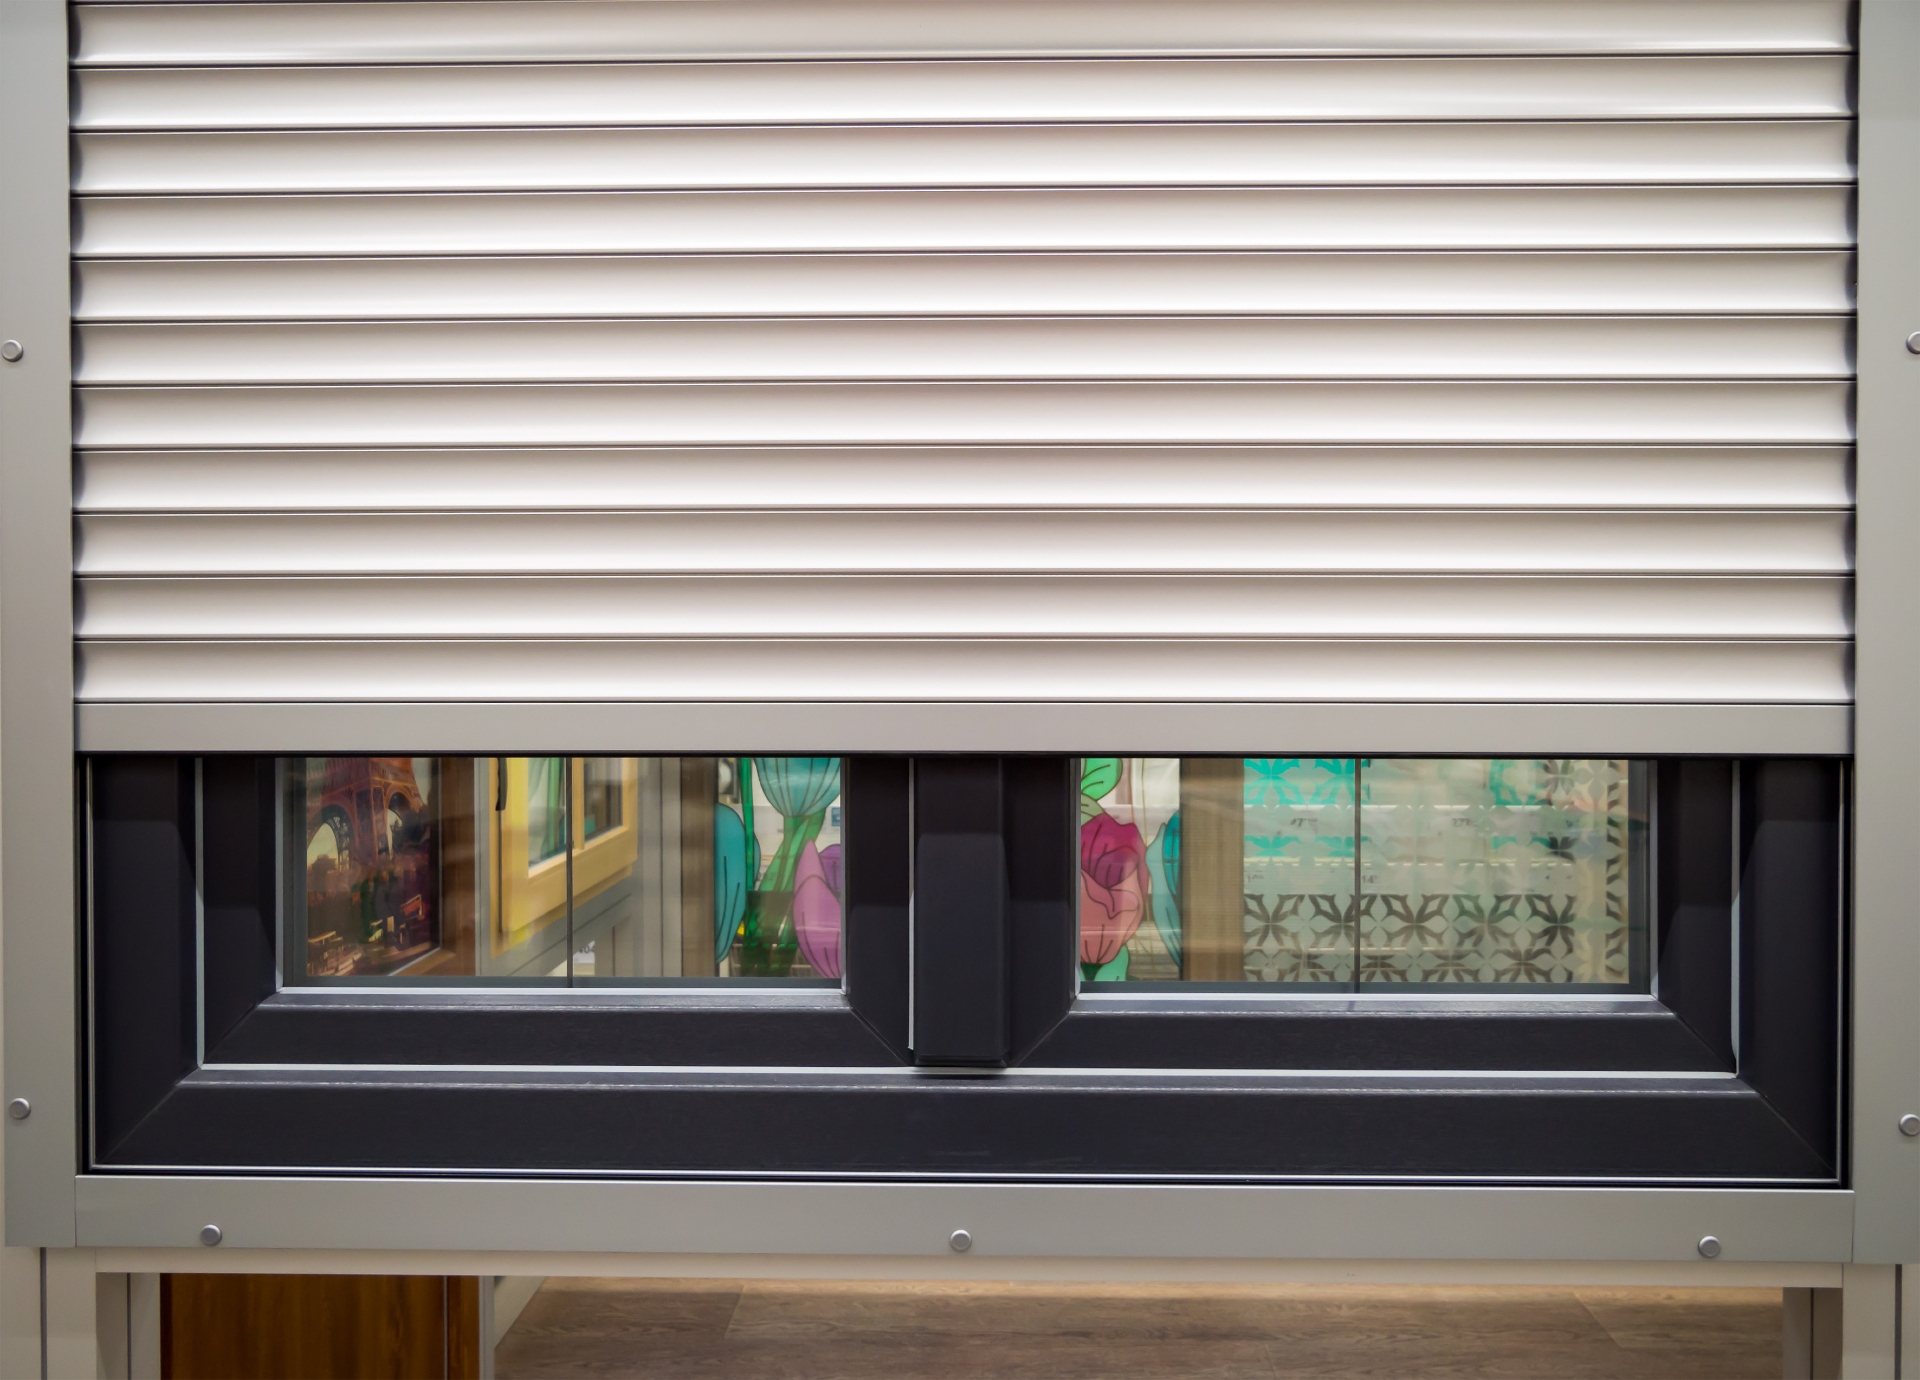 Upgrading your window treatments? Here are the top 5 reasons you should consider shutters